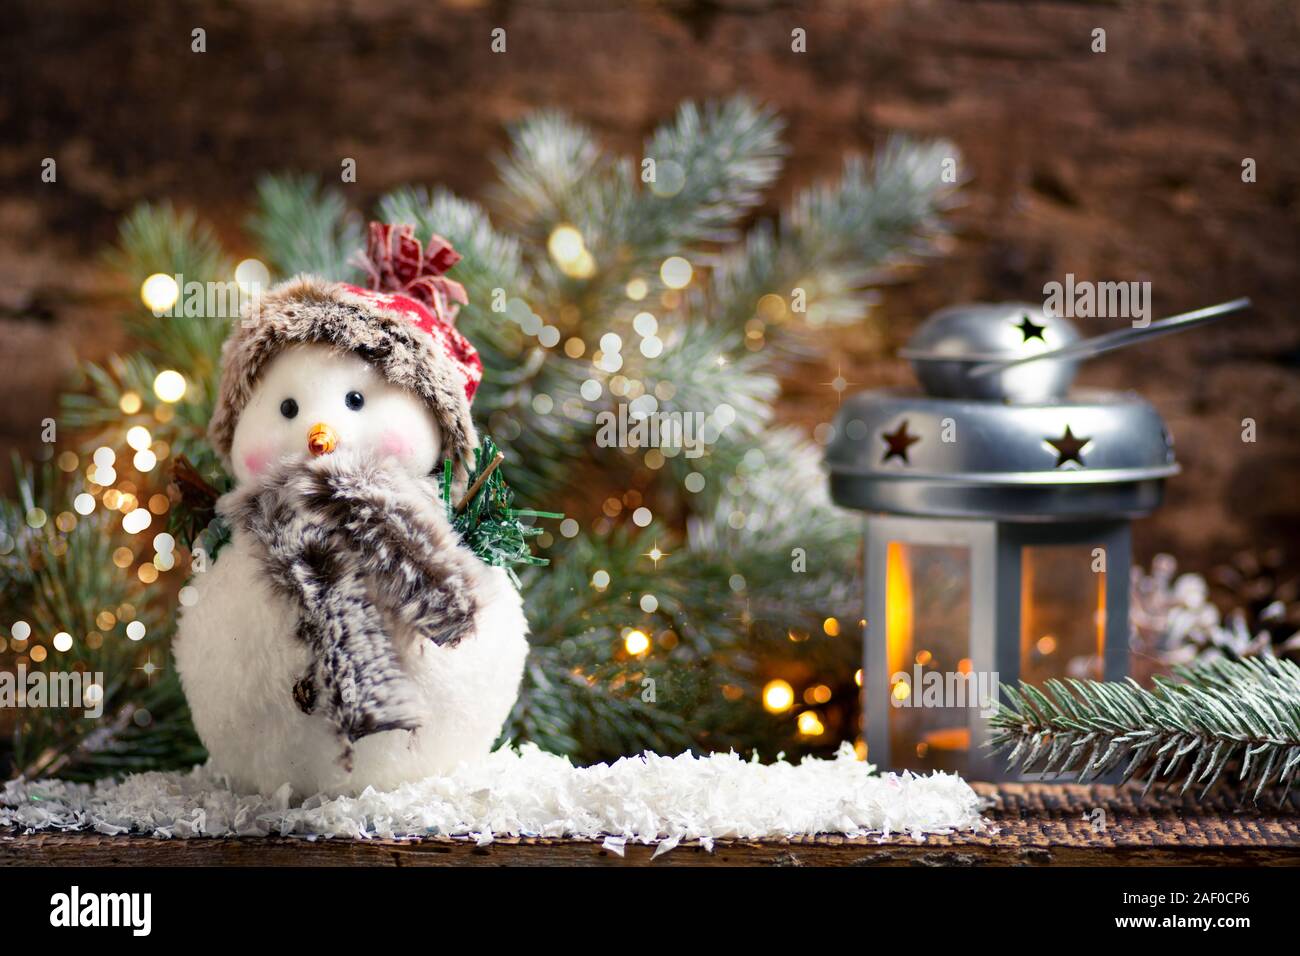 Snowman and iluminated Christmas decorations home arrangement Stock Photo